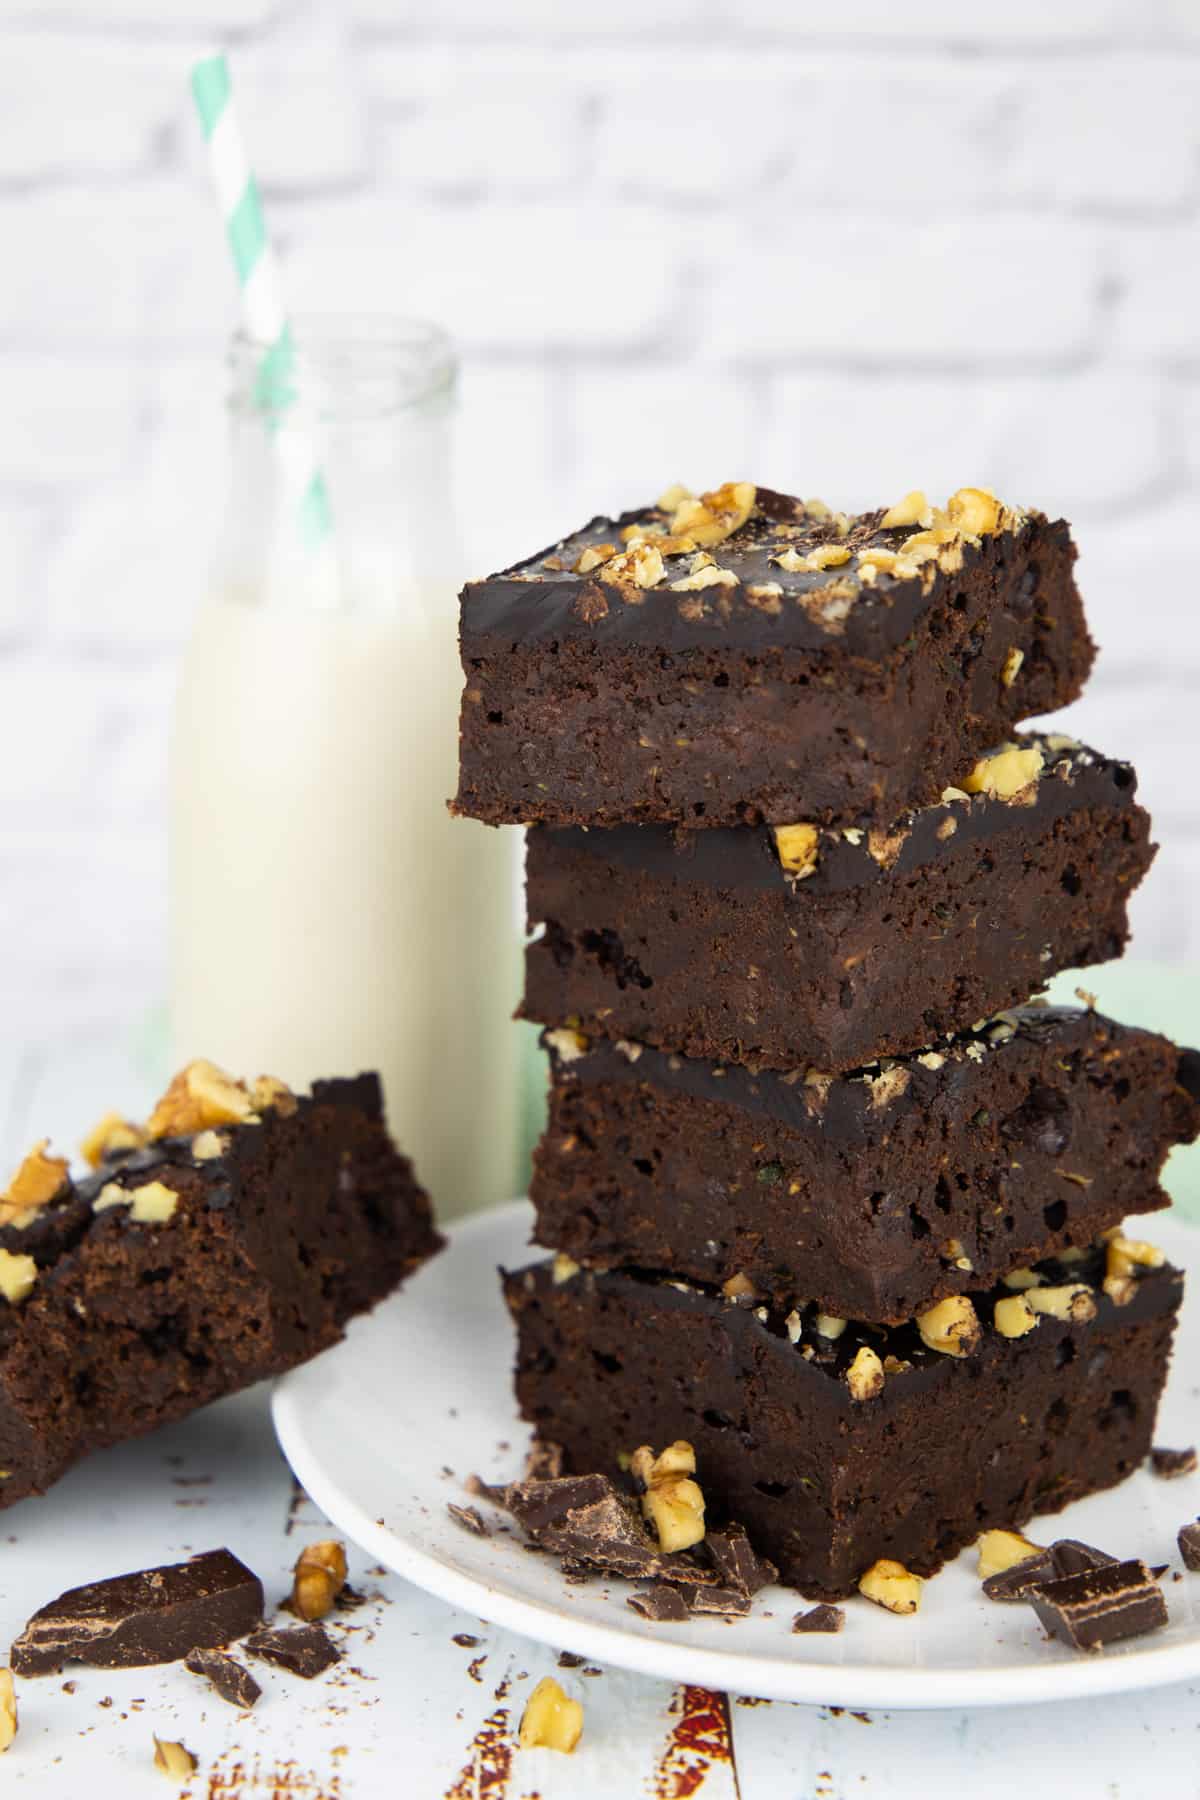 a stack of four zucchini brownies on a white plate with a bottle of milk in the background